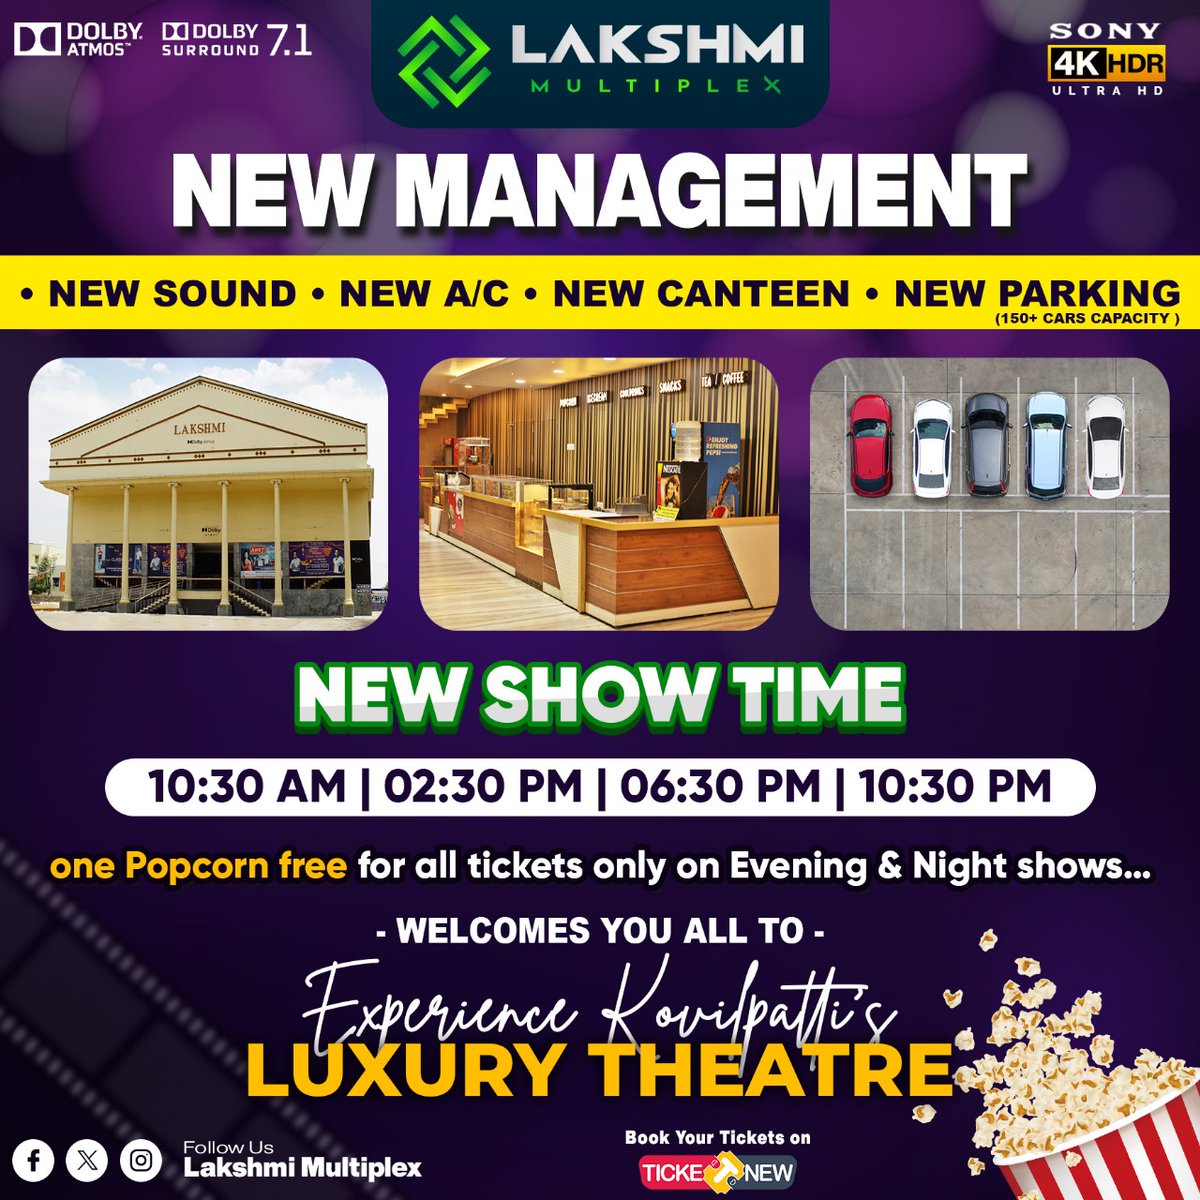 Ne Management Team🙏🏻🤩✨ @lakshmimulti New sound,New A/C, New Canteen, New Parking Facilities Now Available 💥🥳✌🏻 @lakshmimulti One Free 🍿 for All Tickets only on evening, Night show's 🤩💥✨ #lakshmimultiplex #kovilpatti #Newmanagement #Newfacilities